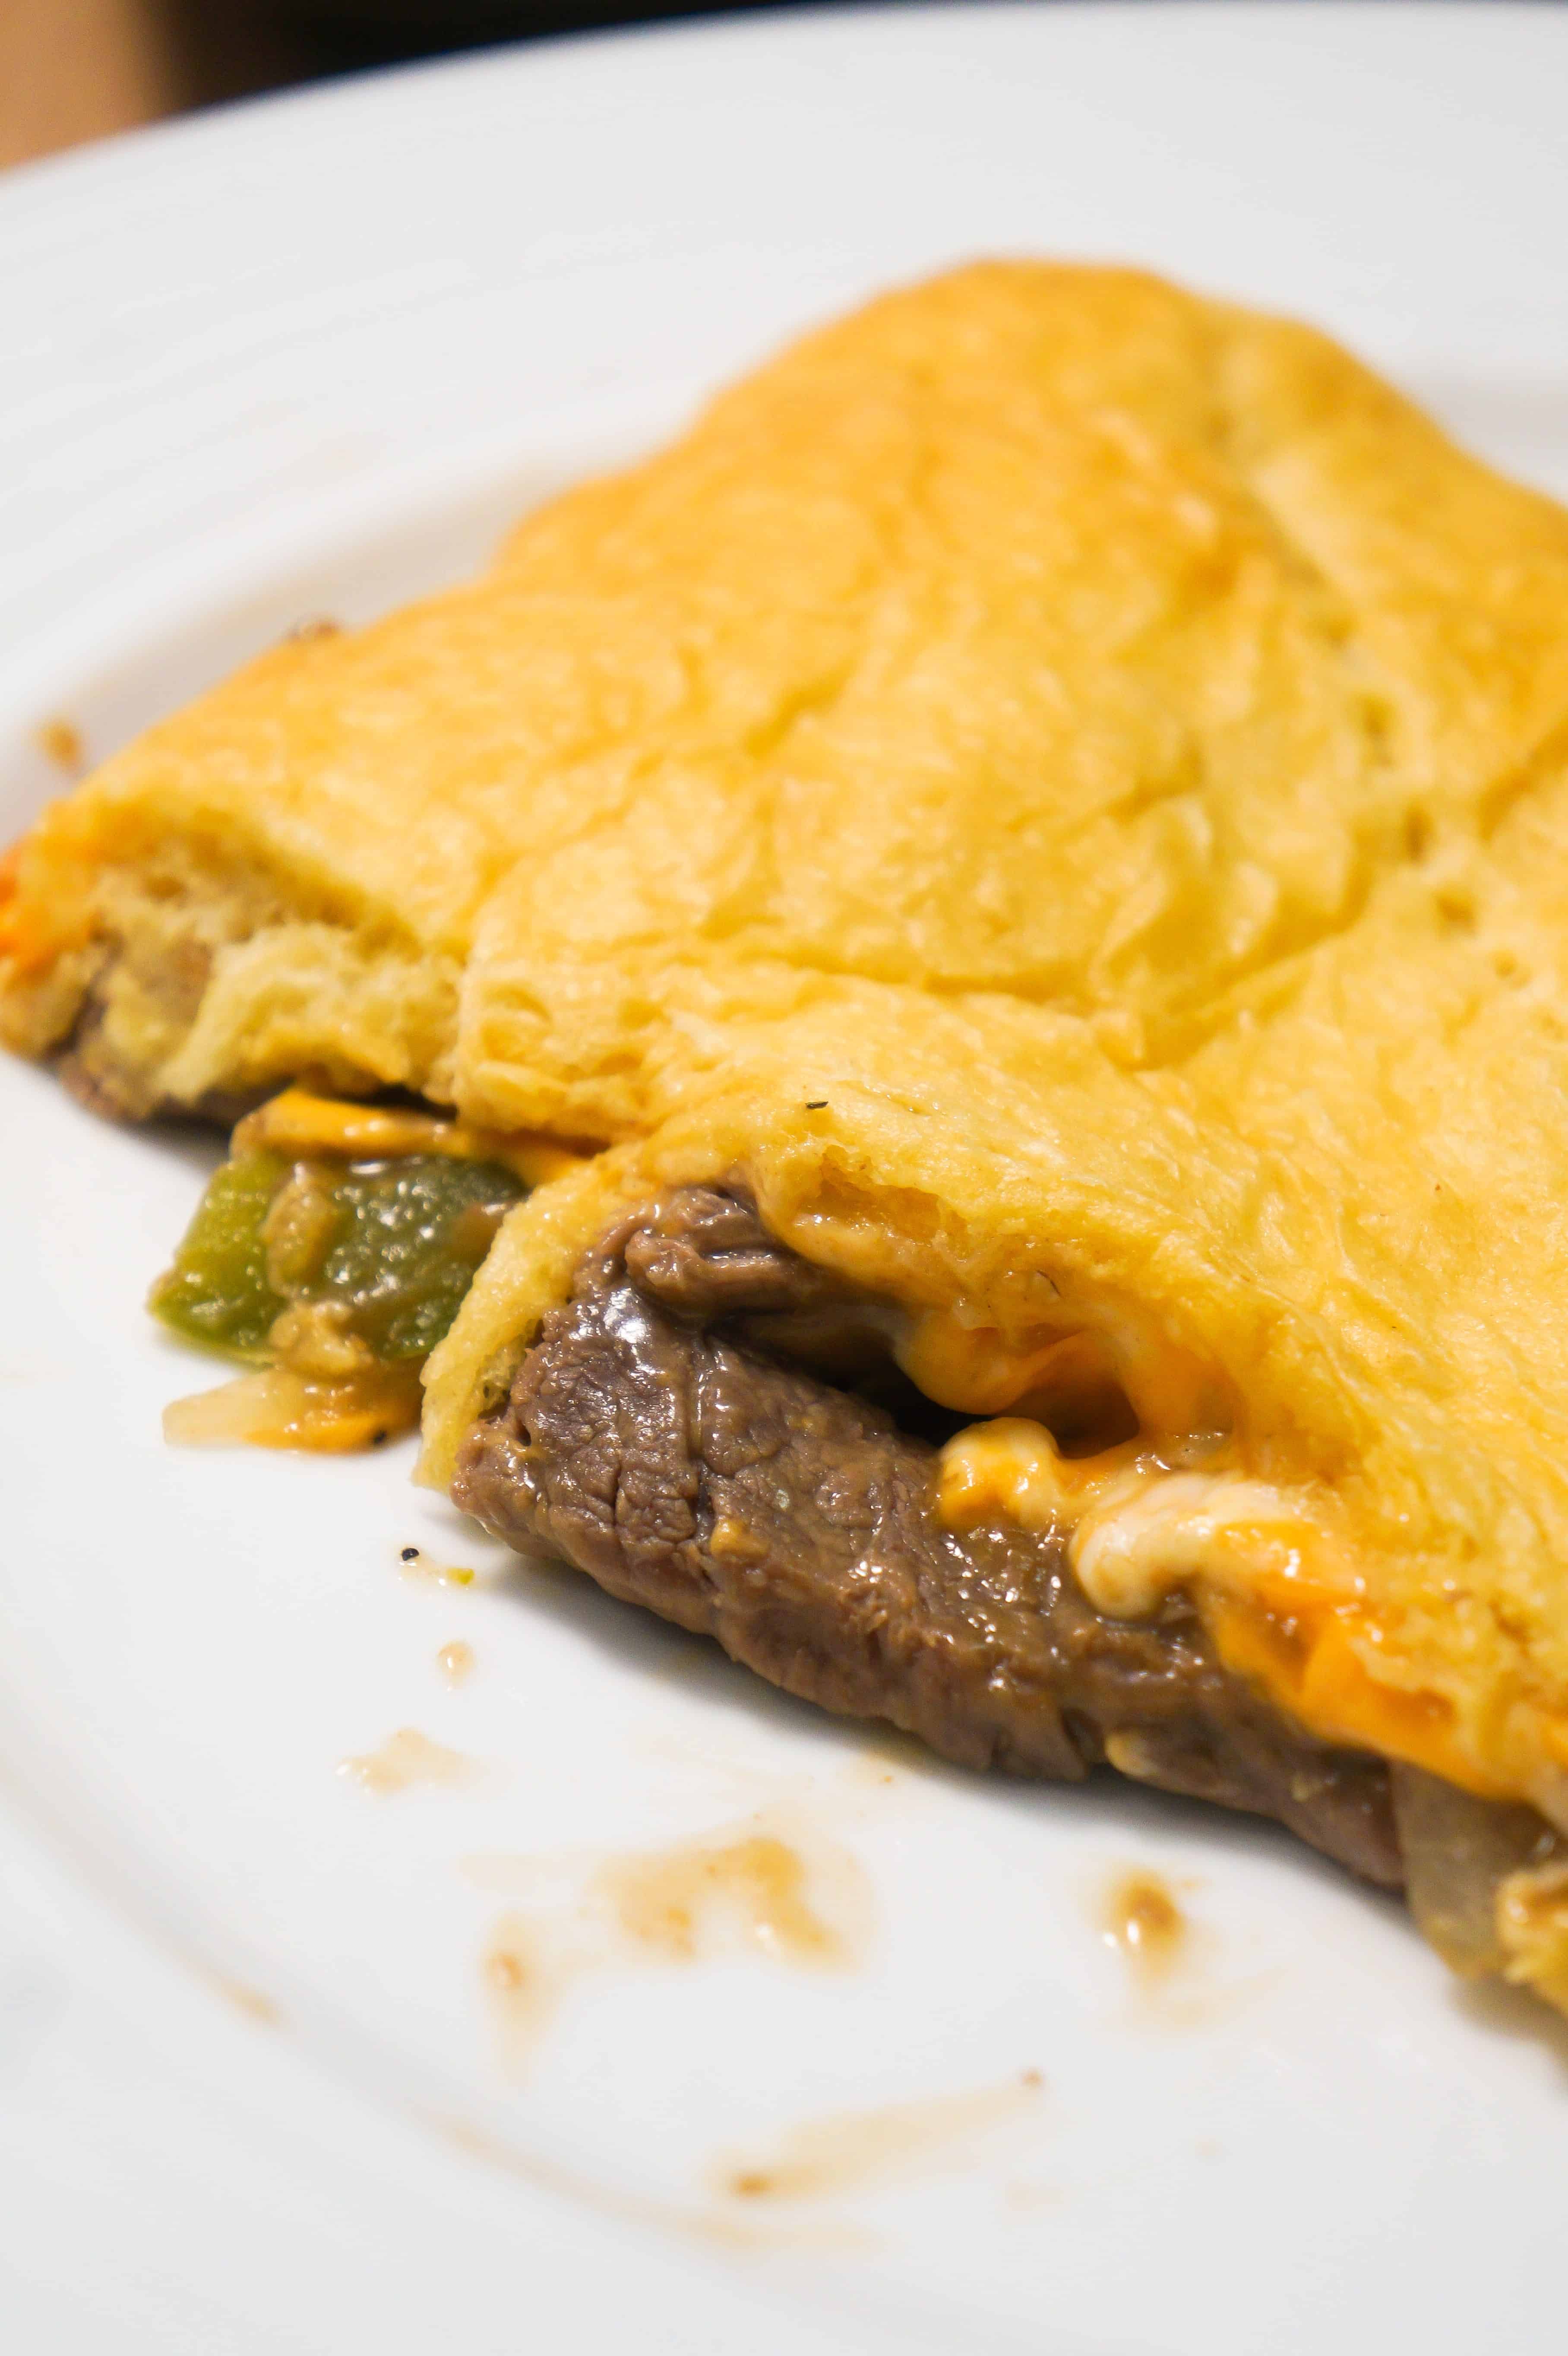 Philly Cheese Steak Crescent Bake is a twist on the Philly Cheese Sandwich.